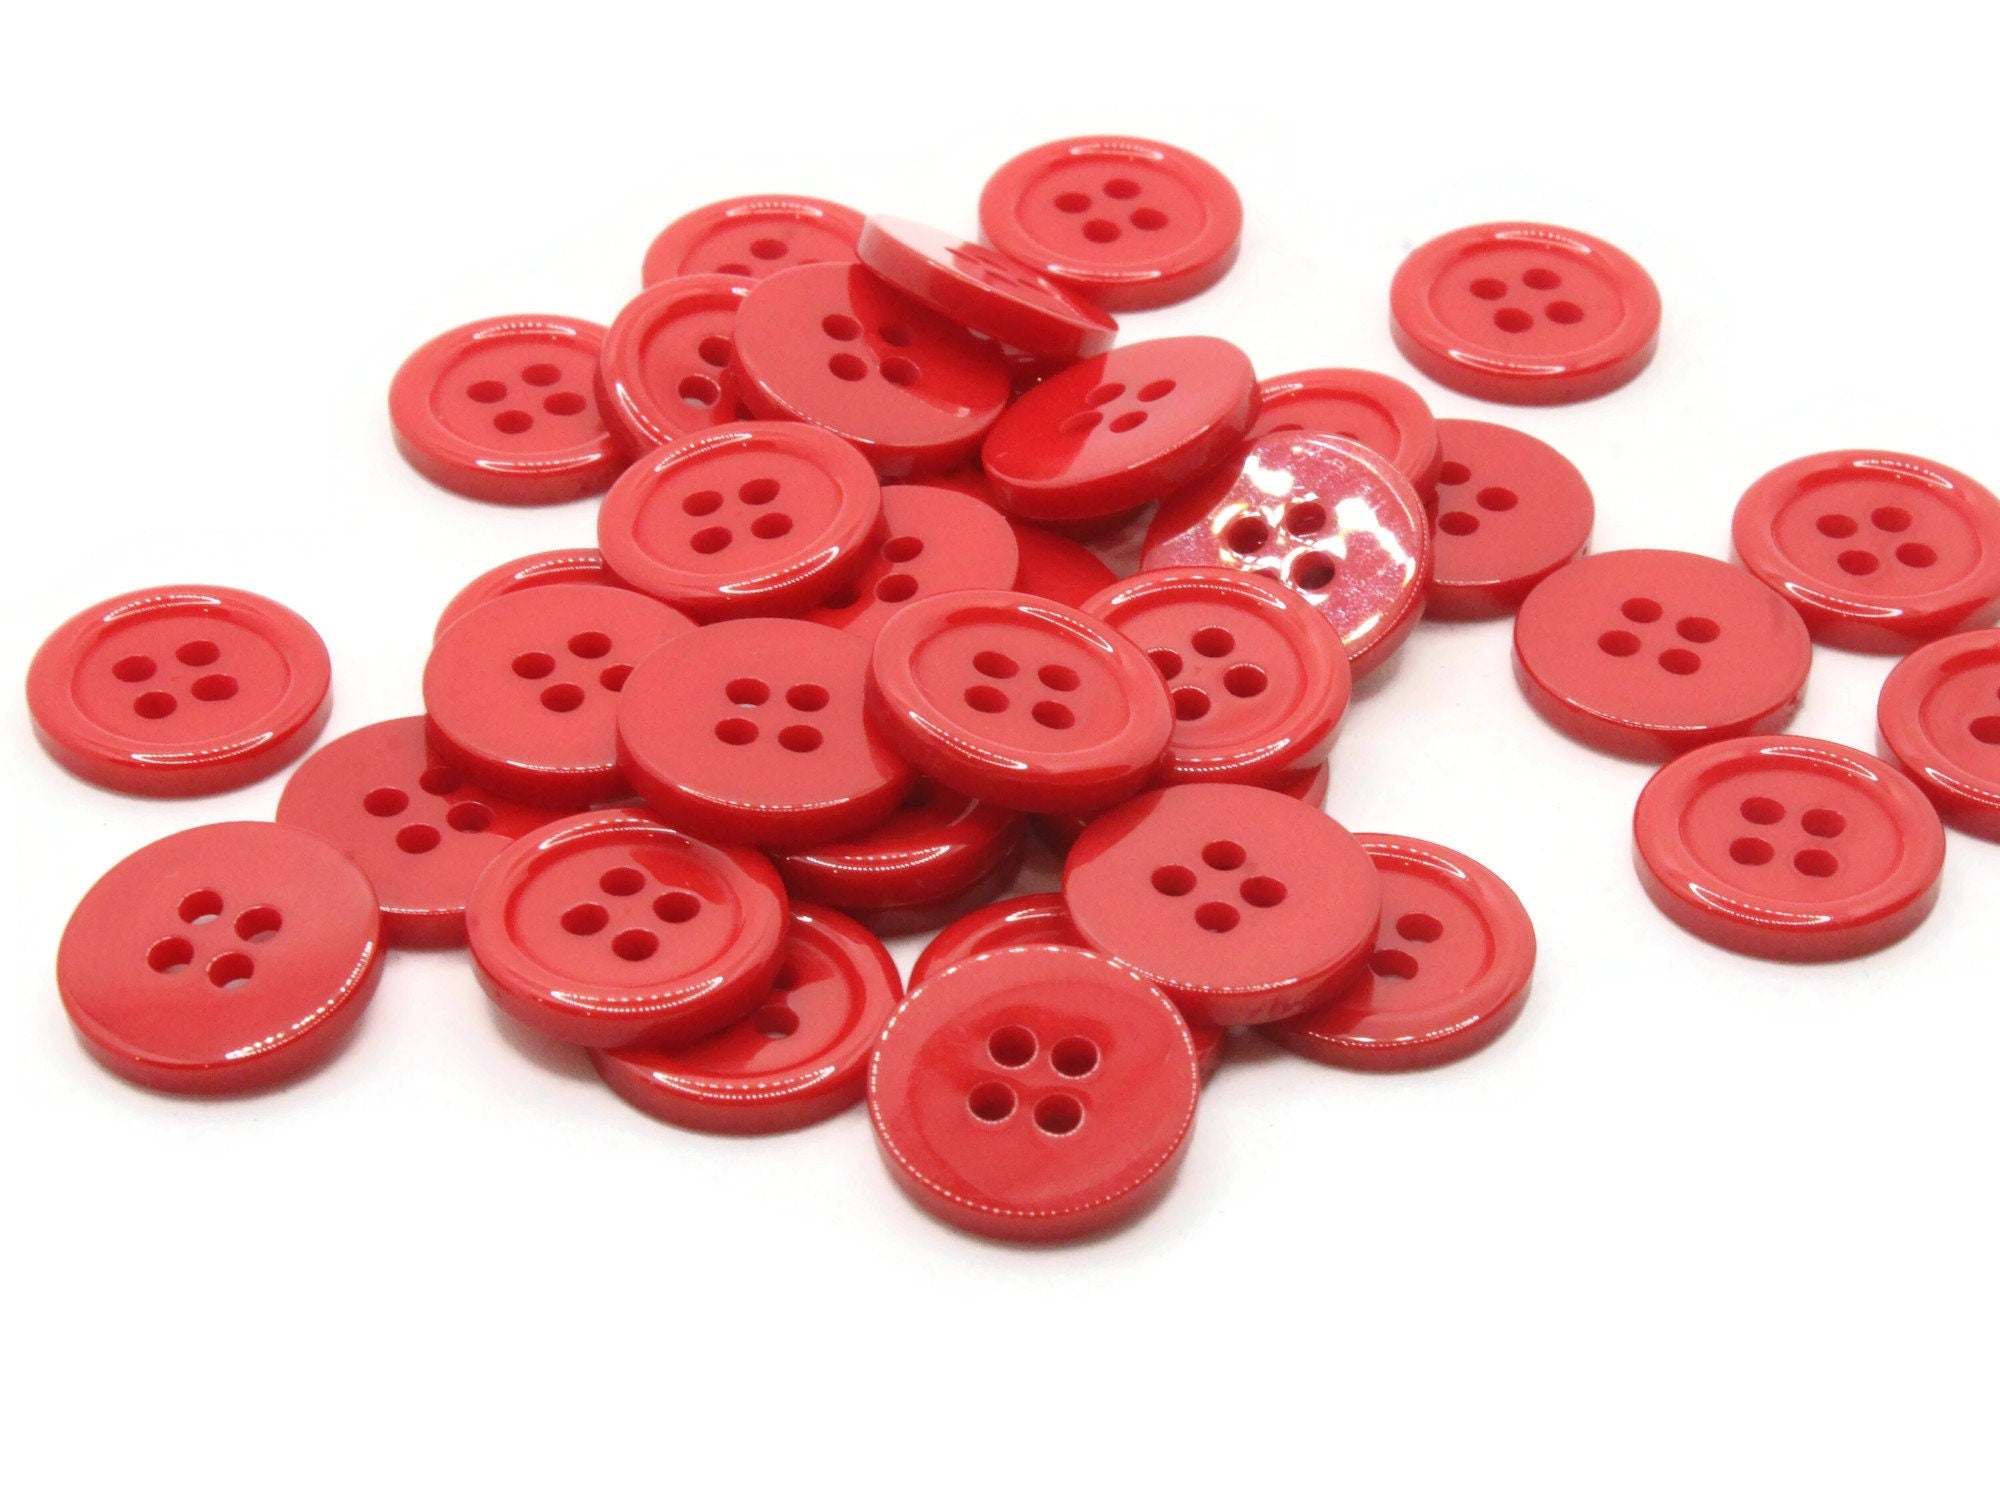 10, 15mm (24L) red buttons, bright red buttons, red resin buttons, red baby  buttons, craft buttons, sewing buttons, smartie buttons